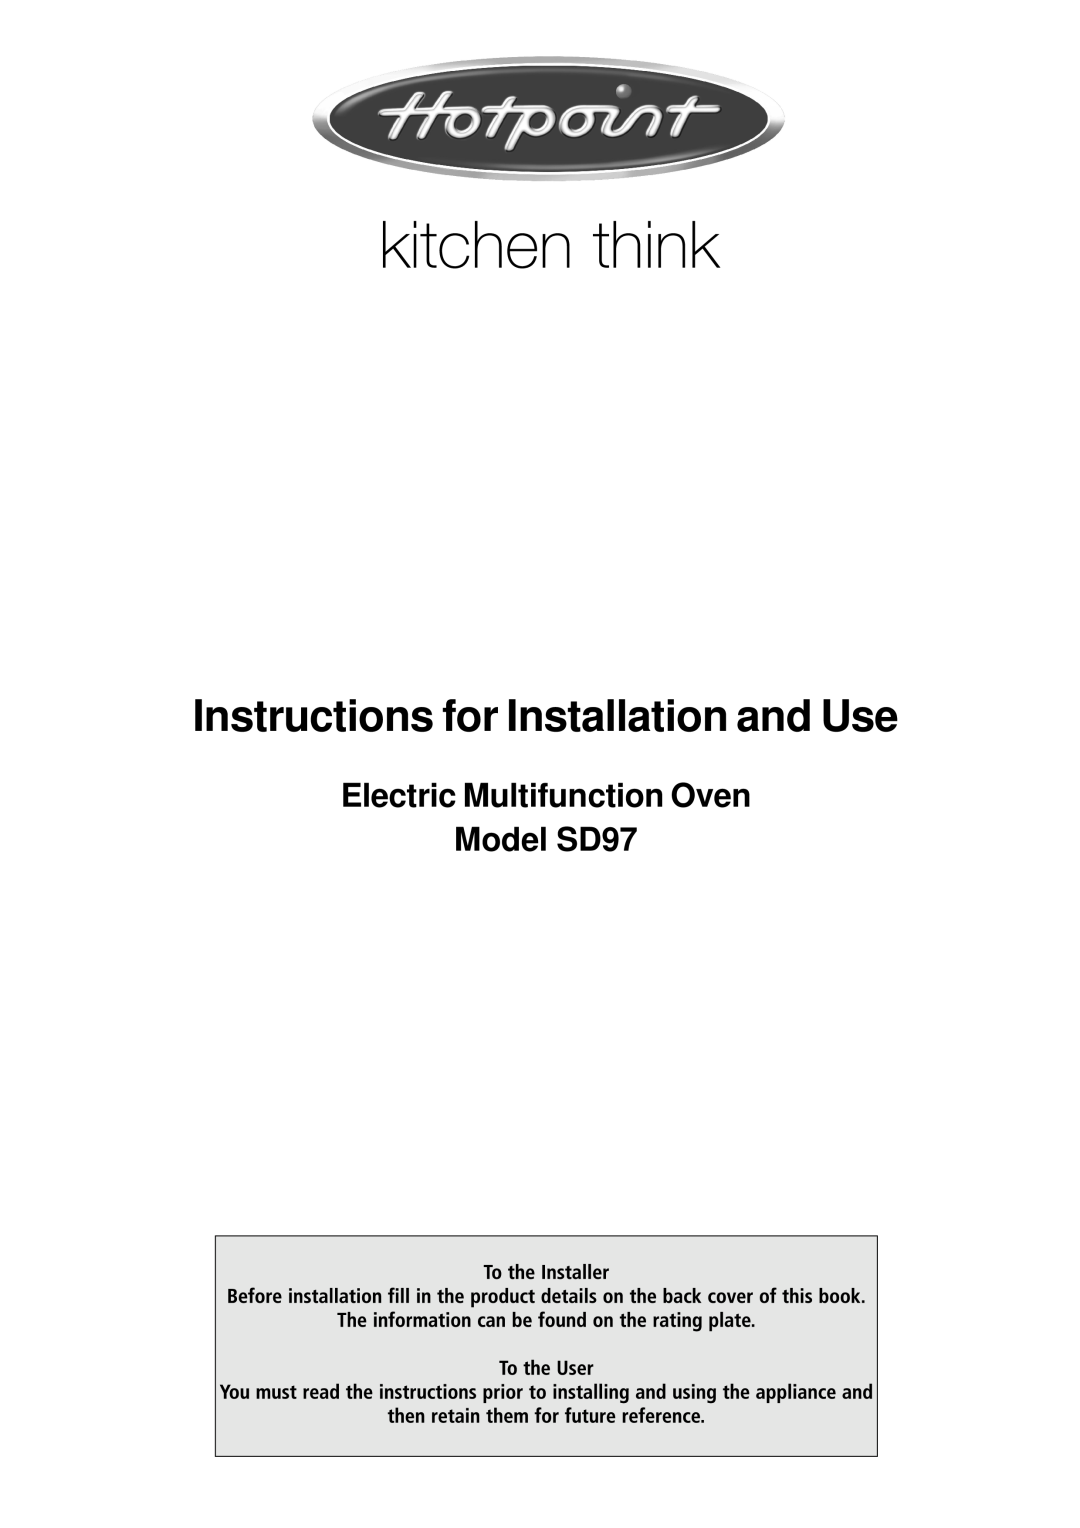 Hotpoint manual Electric Multifunction Oven Model SD97, Instructions for Installation and Use 